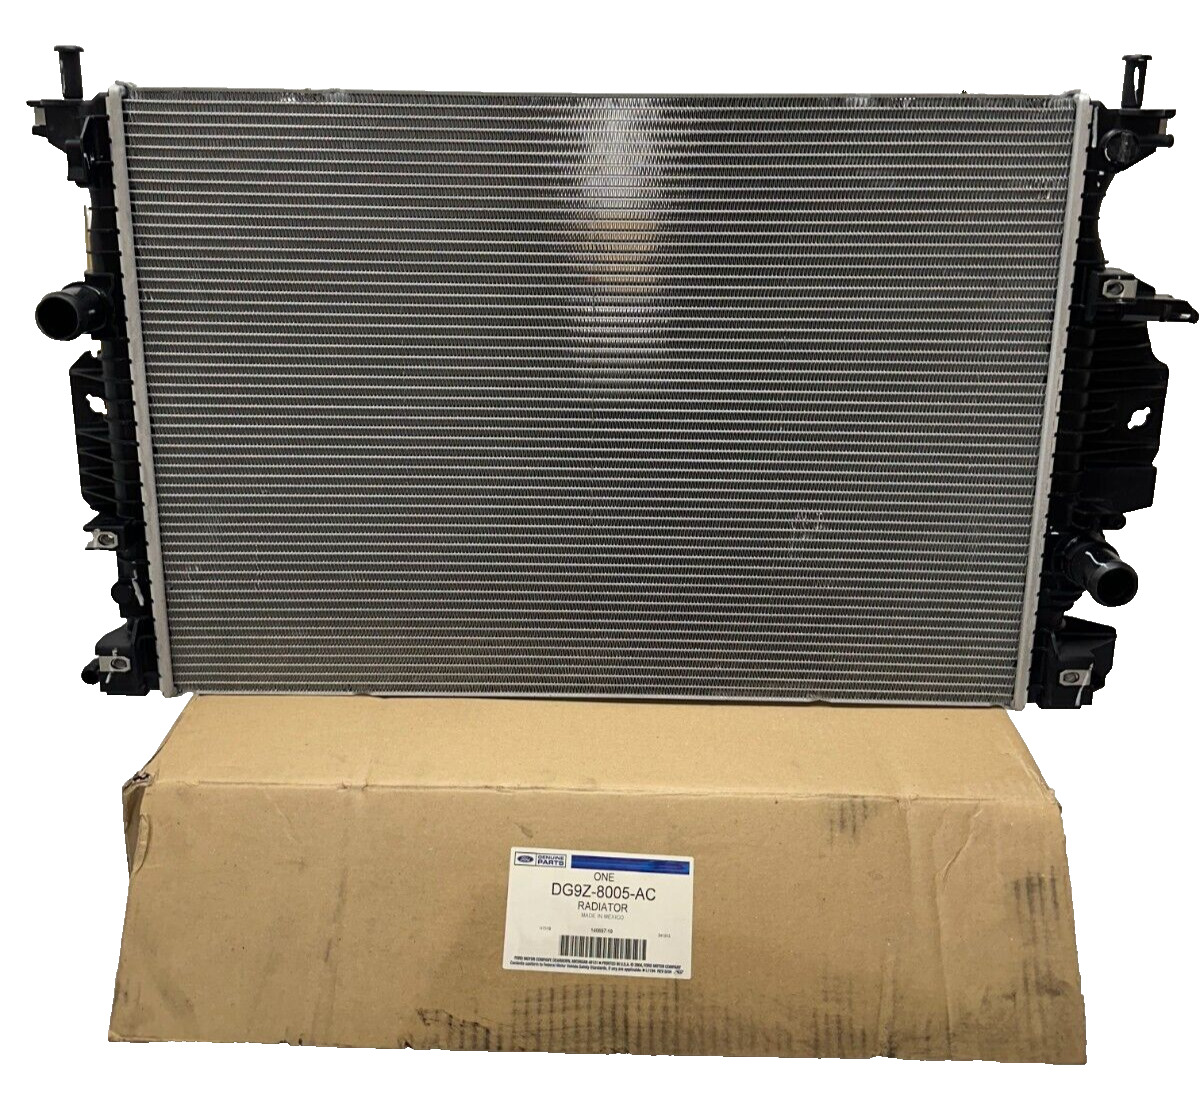 Genuine Ford Radiator Assembly For 2013-2019 Ford Fusion Lincoln MKZ 1.6L 2.0L